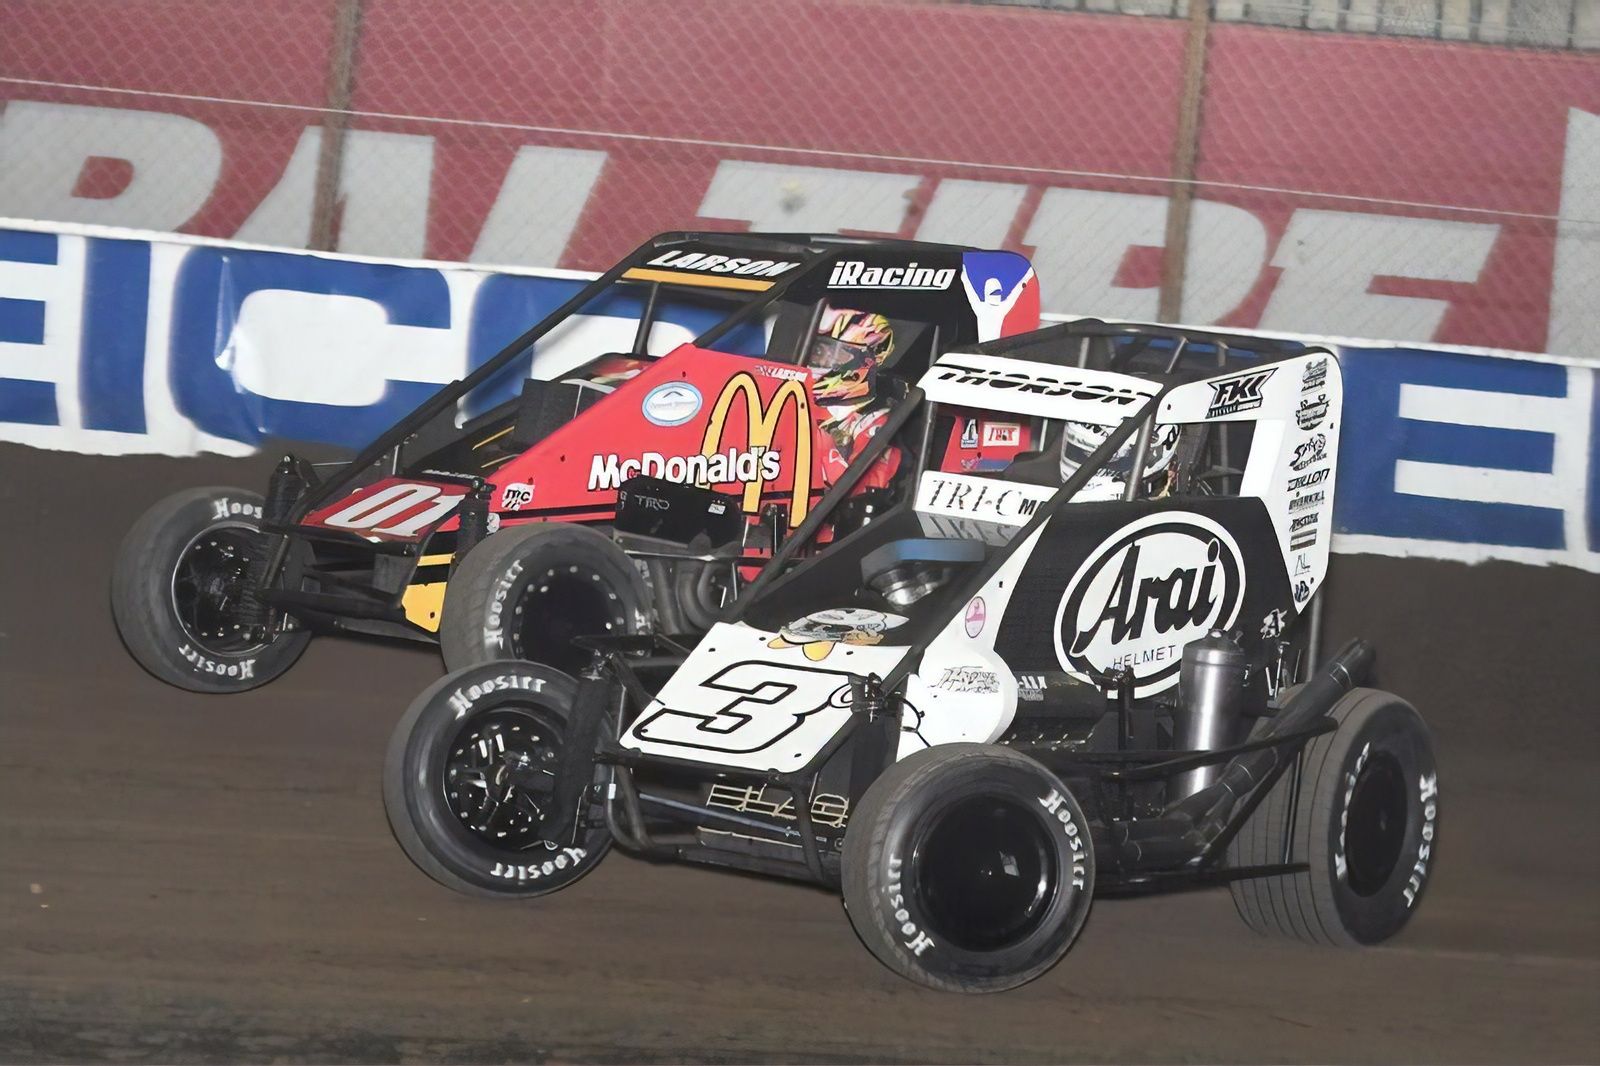 Chili Bowl entry list includes USAC, NASCAR and IndyCar stars